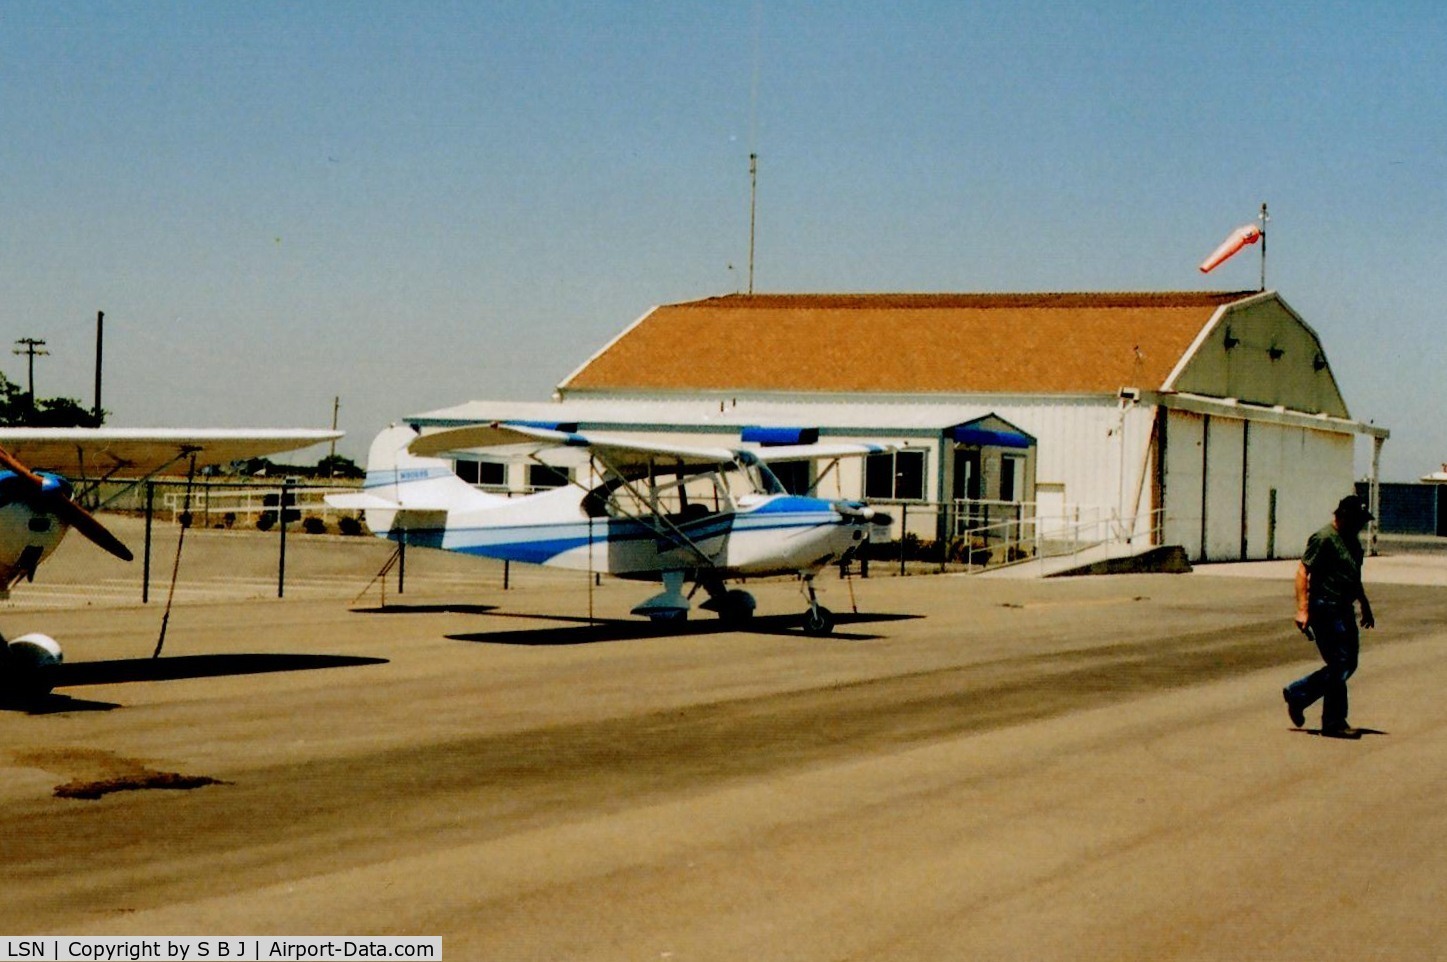 Los Banos Municipal Airport (LSN) - Good picture of the airport office and large hangar next to it.